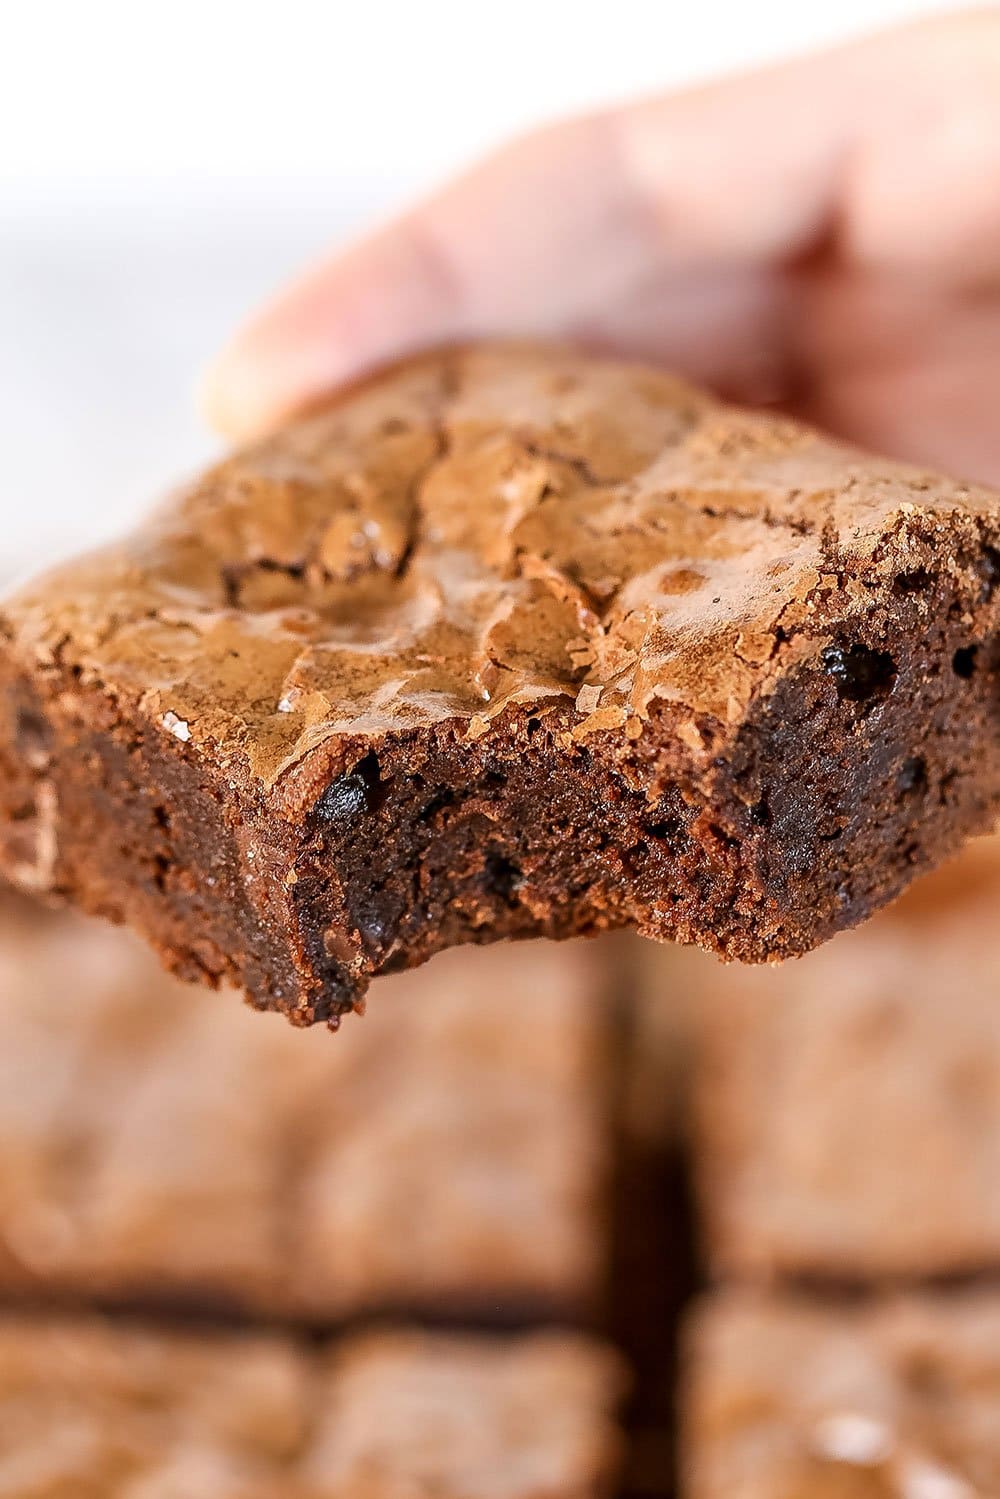 Delicious and simply homemade brownie recipe